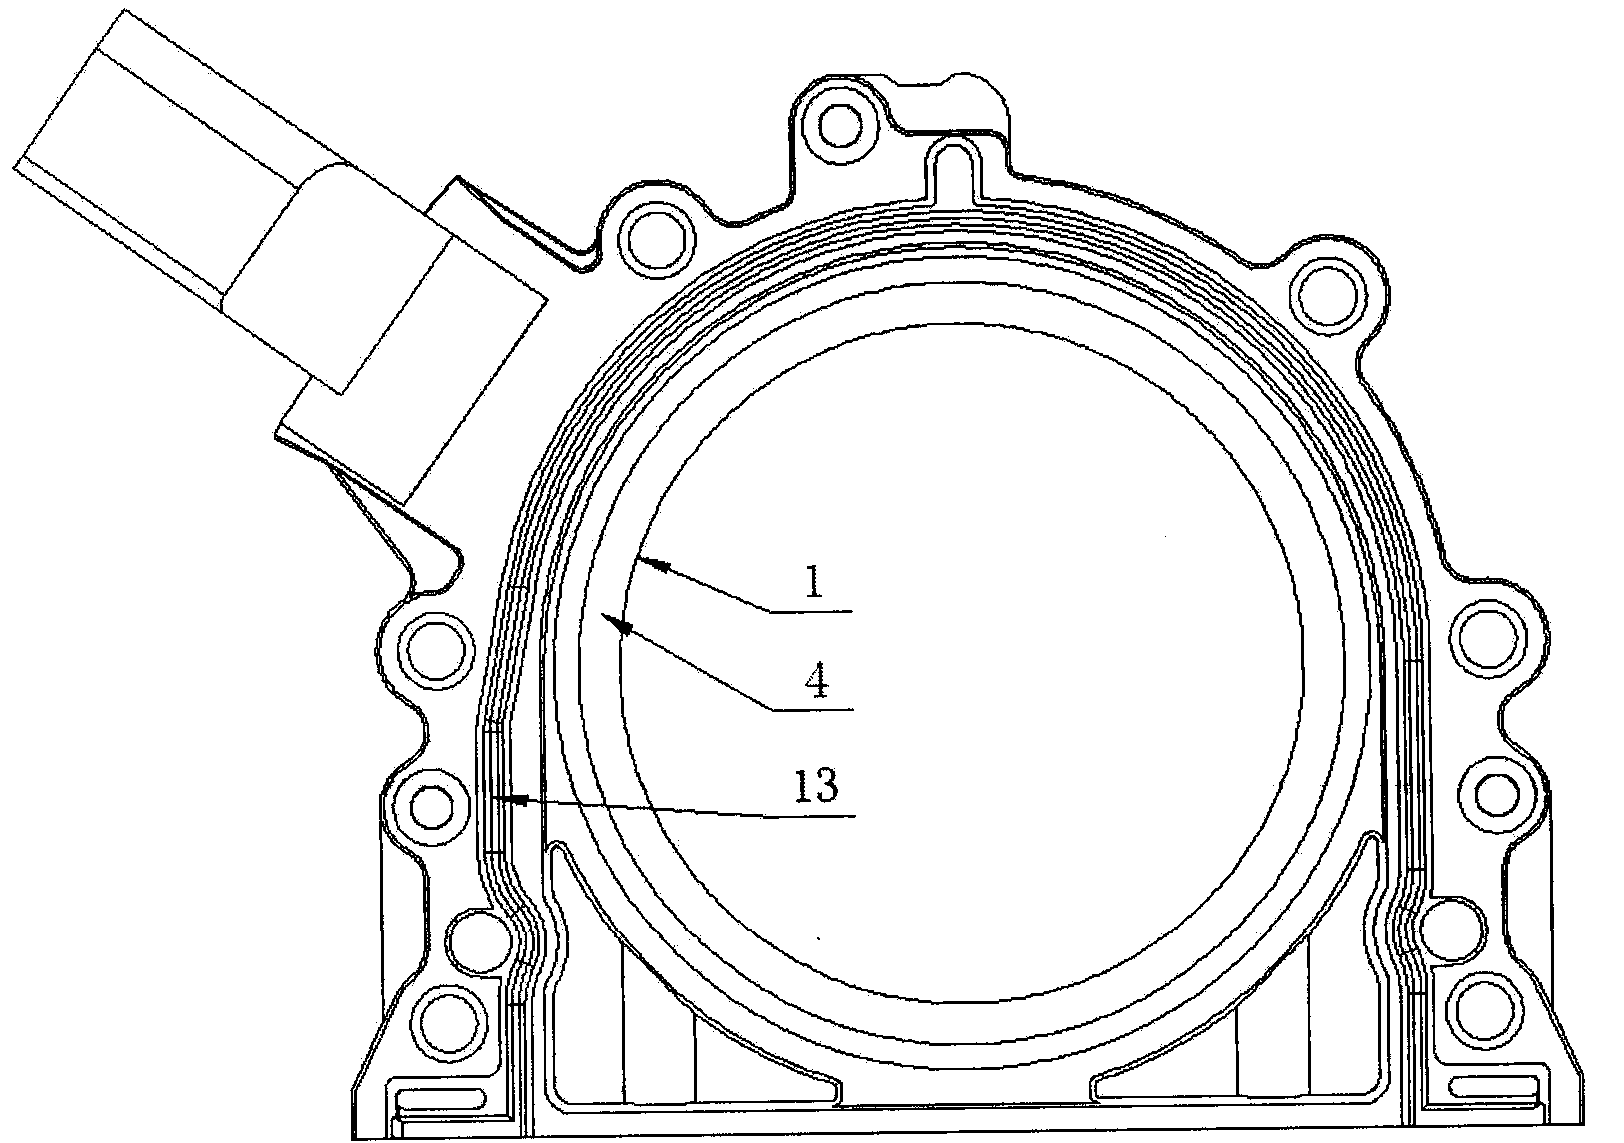 Assembly oil seal with sensing function